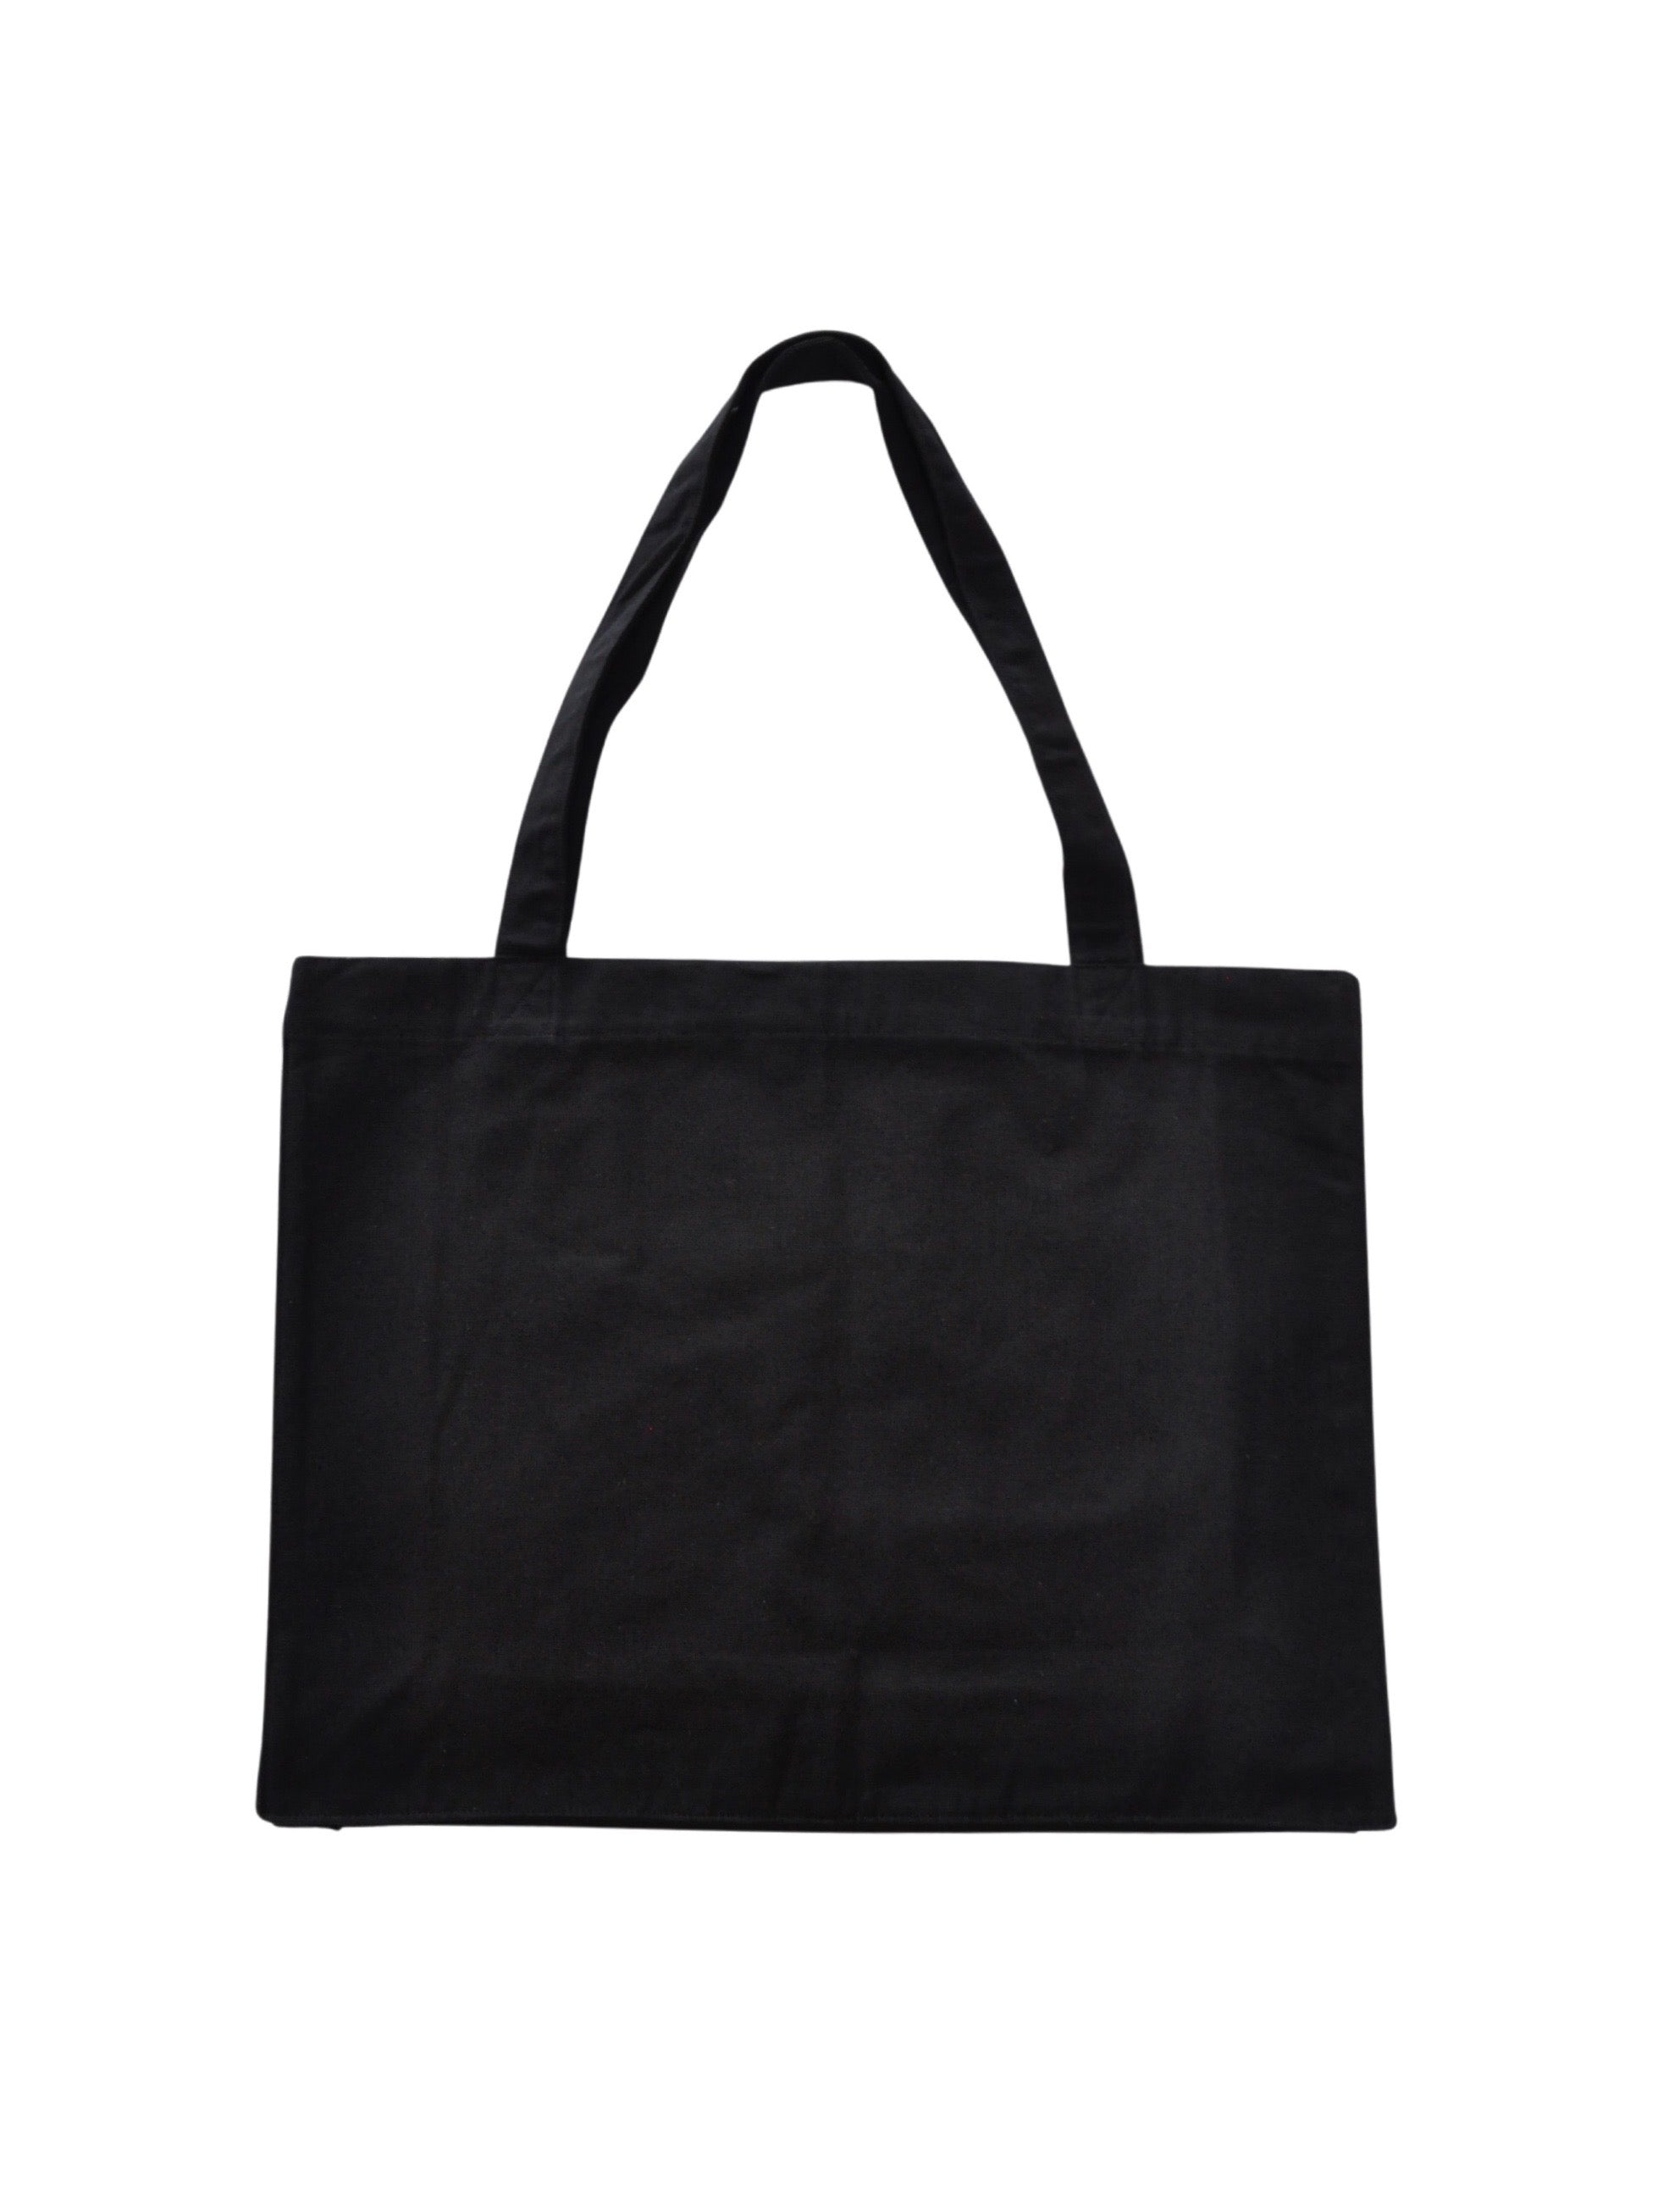 BY11 x Intangible Objects Recycled Cotton Canvas Tote Bag - Black